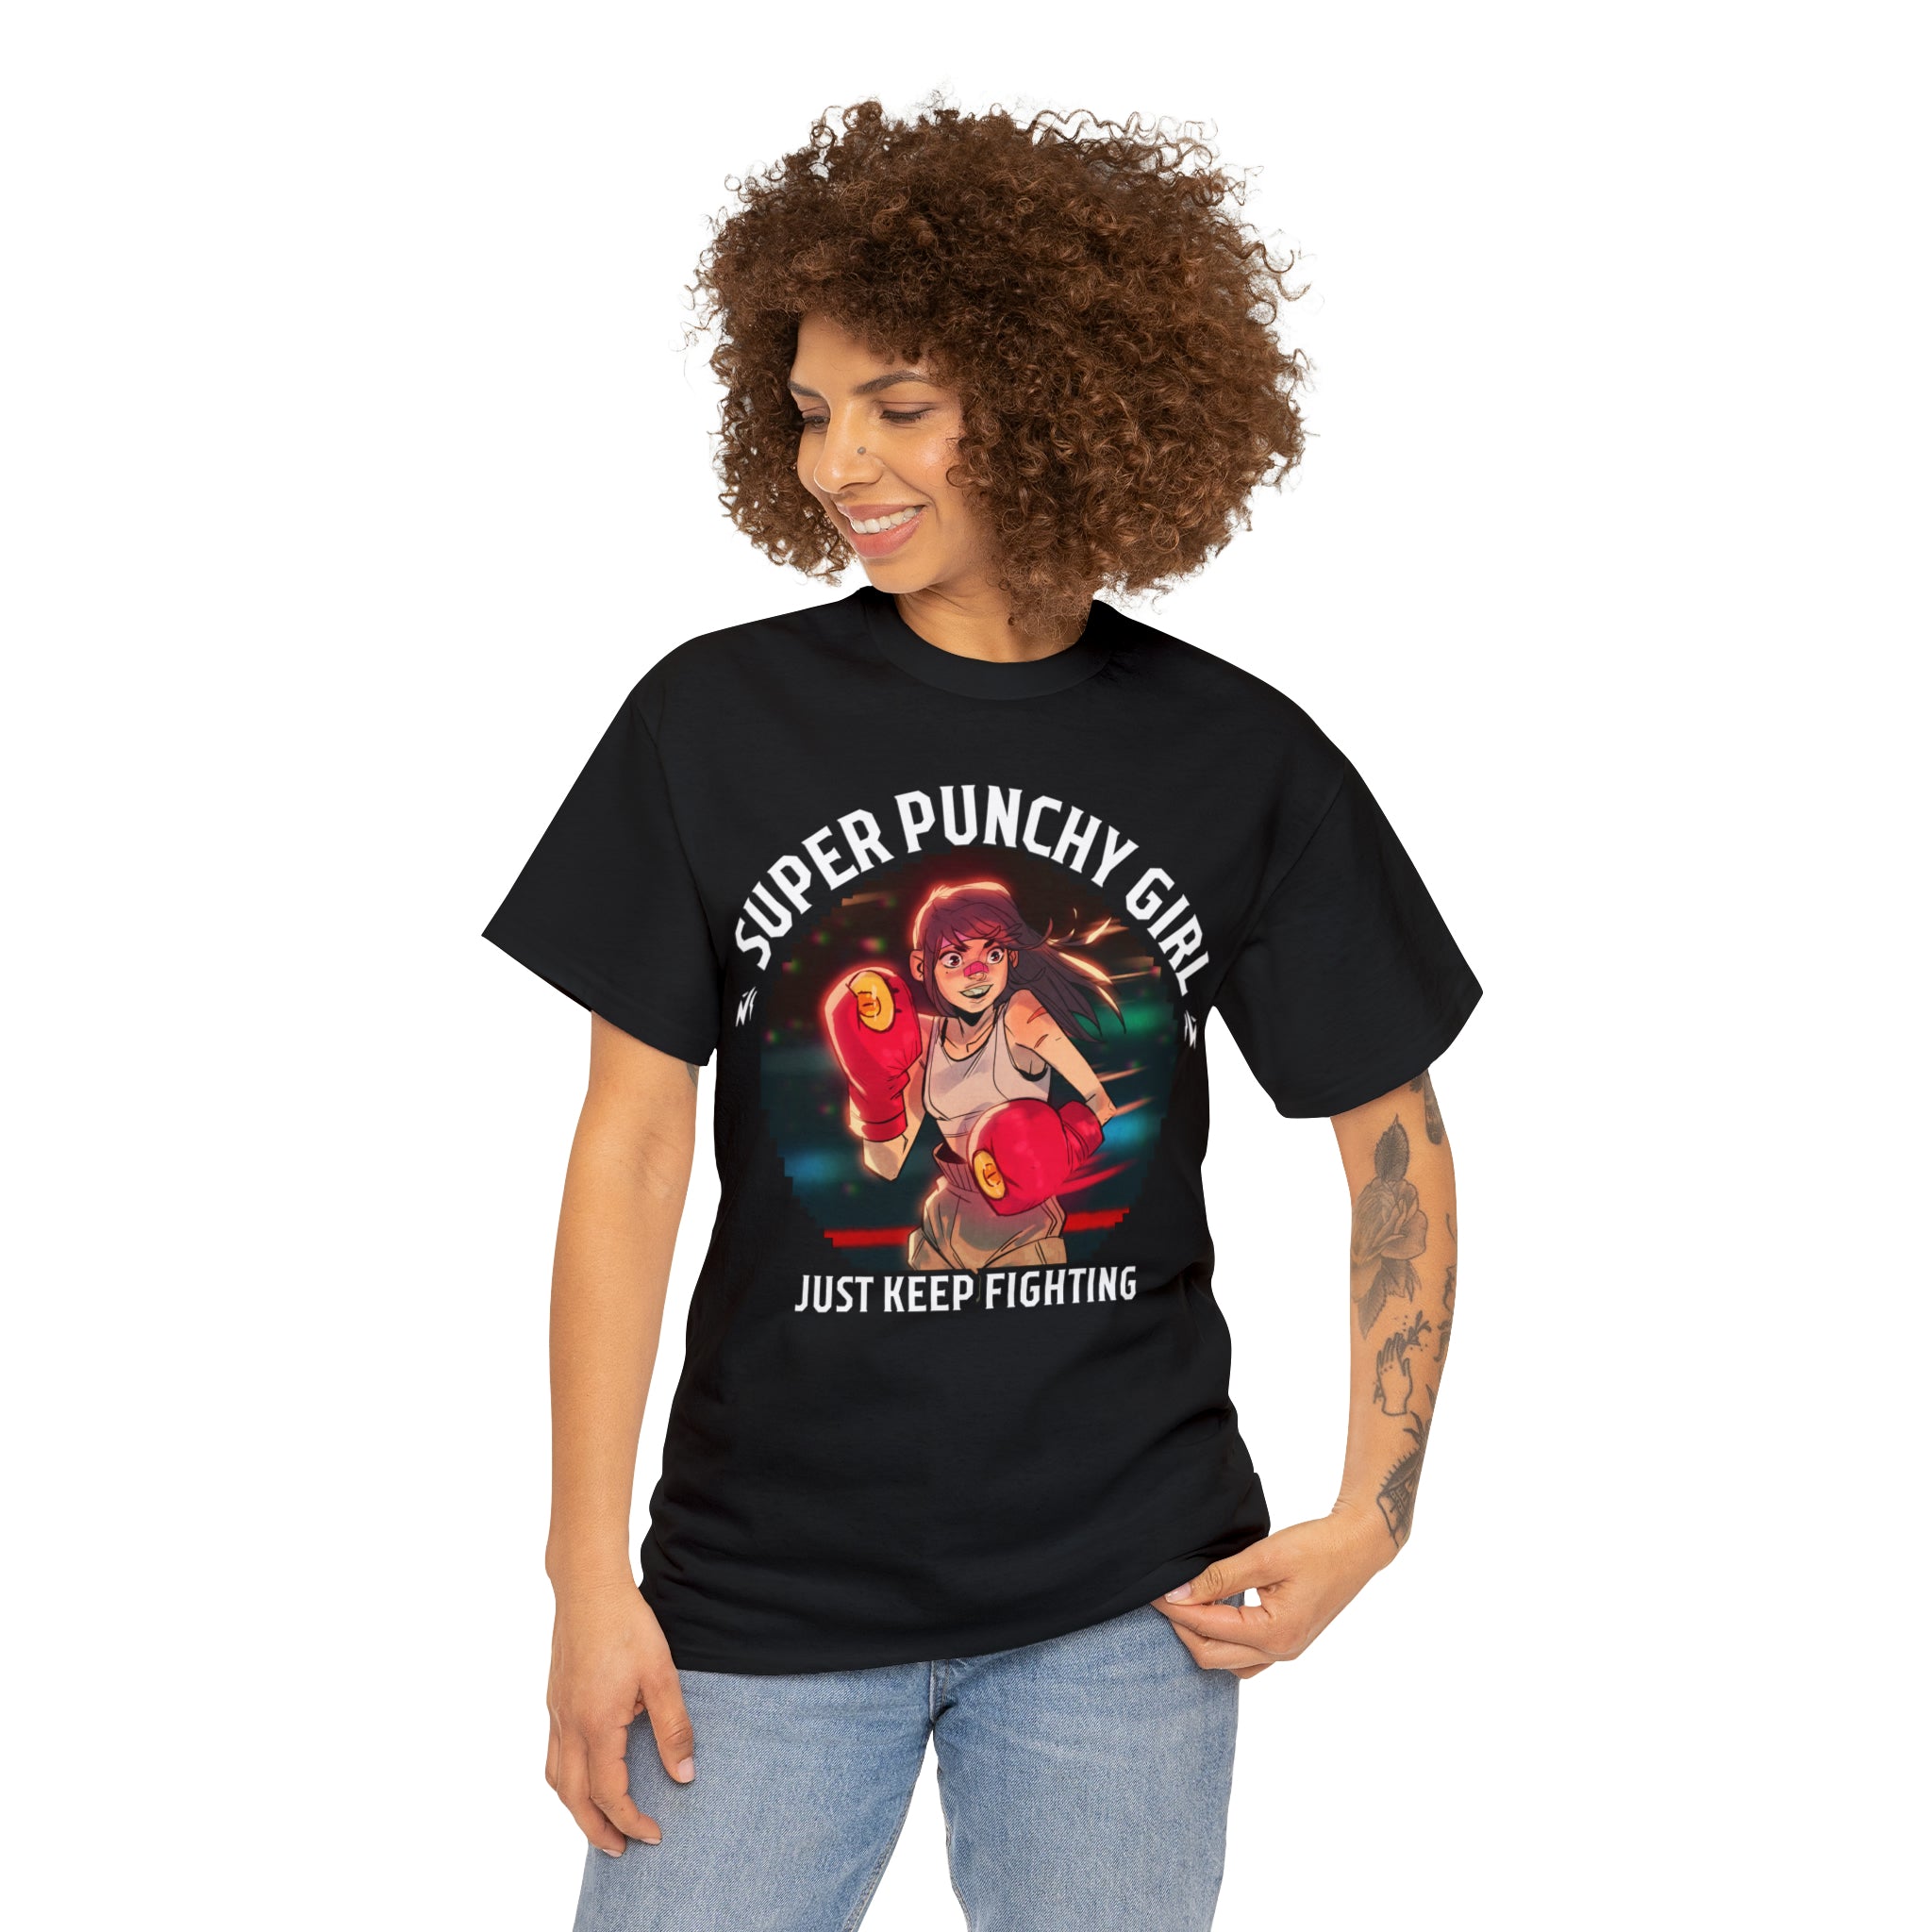 Super Punchy Girl Tee